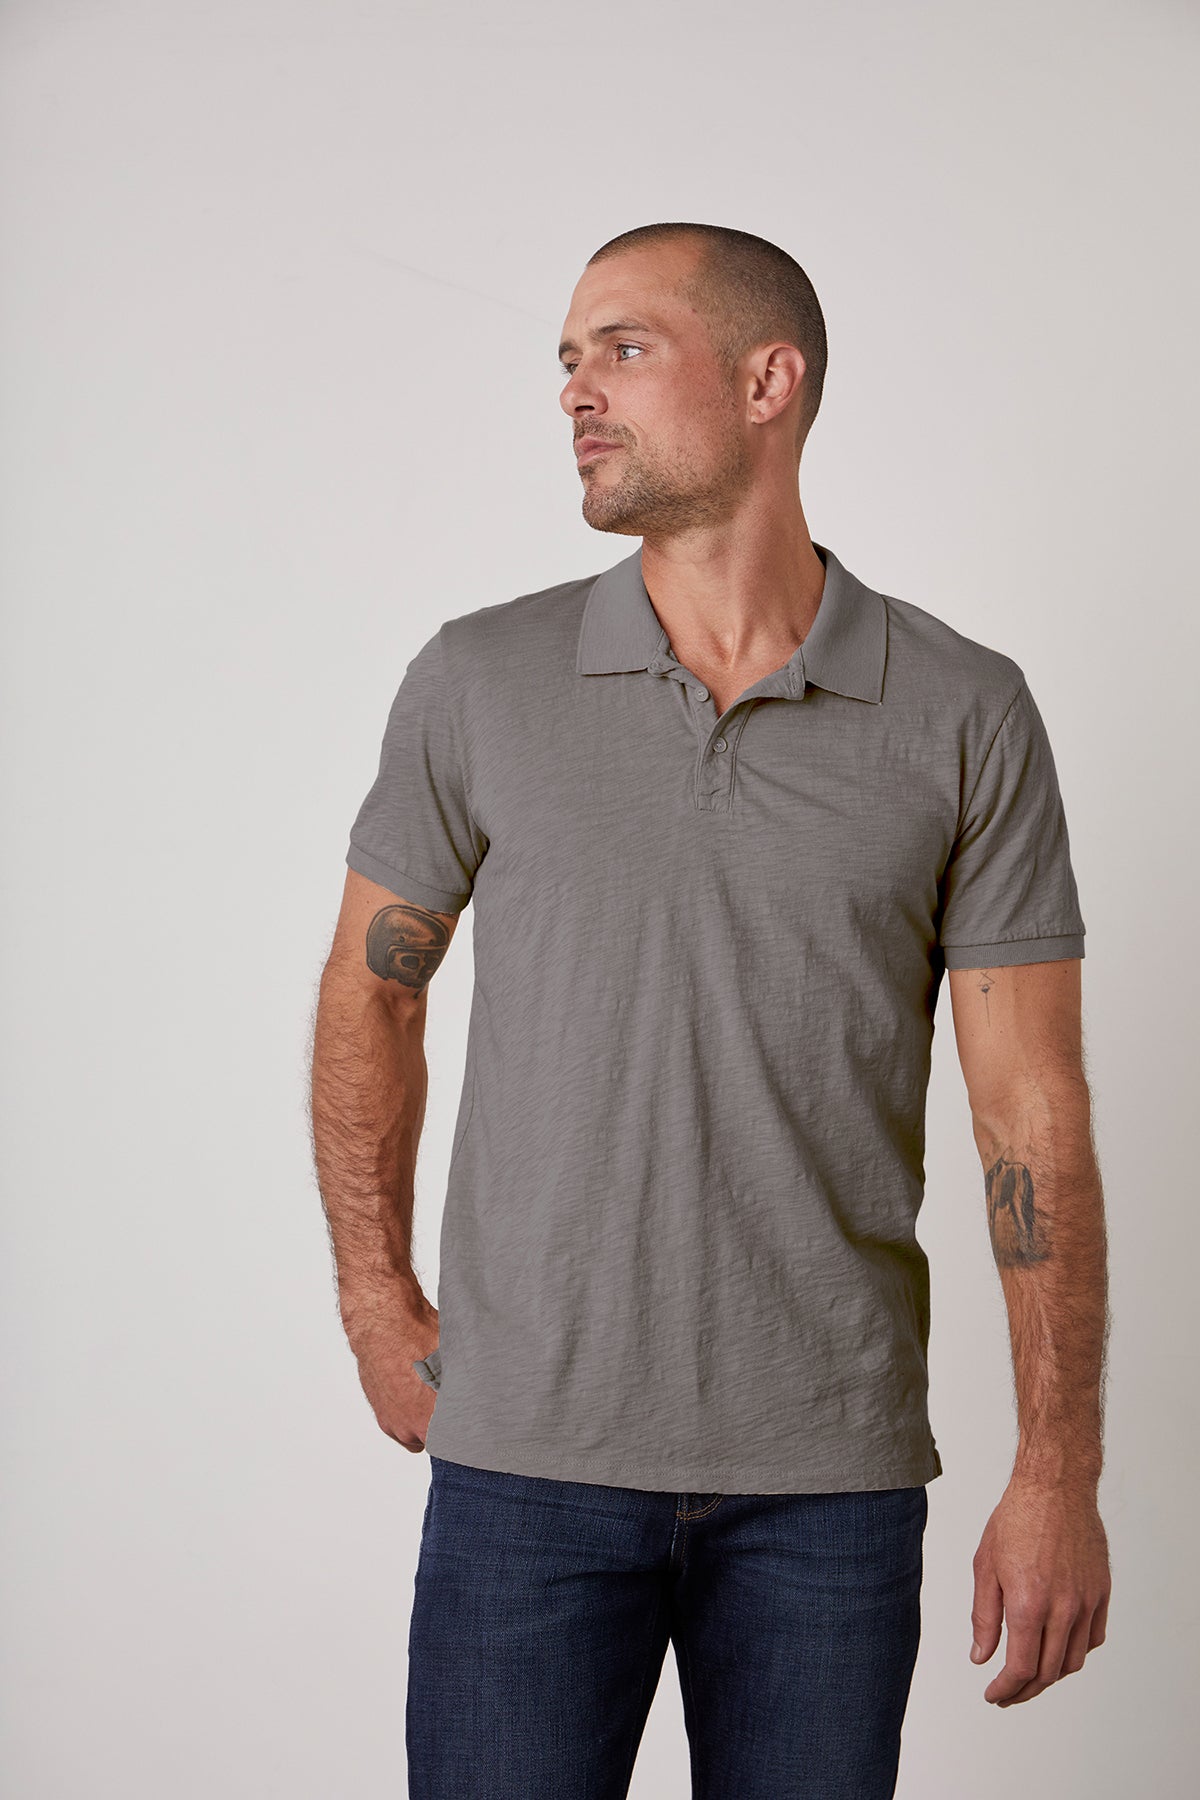   A man wearing a classic NIKO POLO shirt silhouette in a gray color, paired with jeans. 